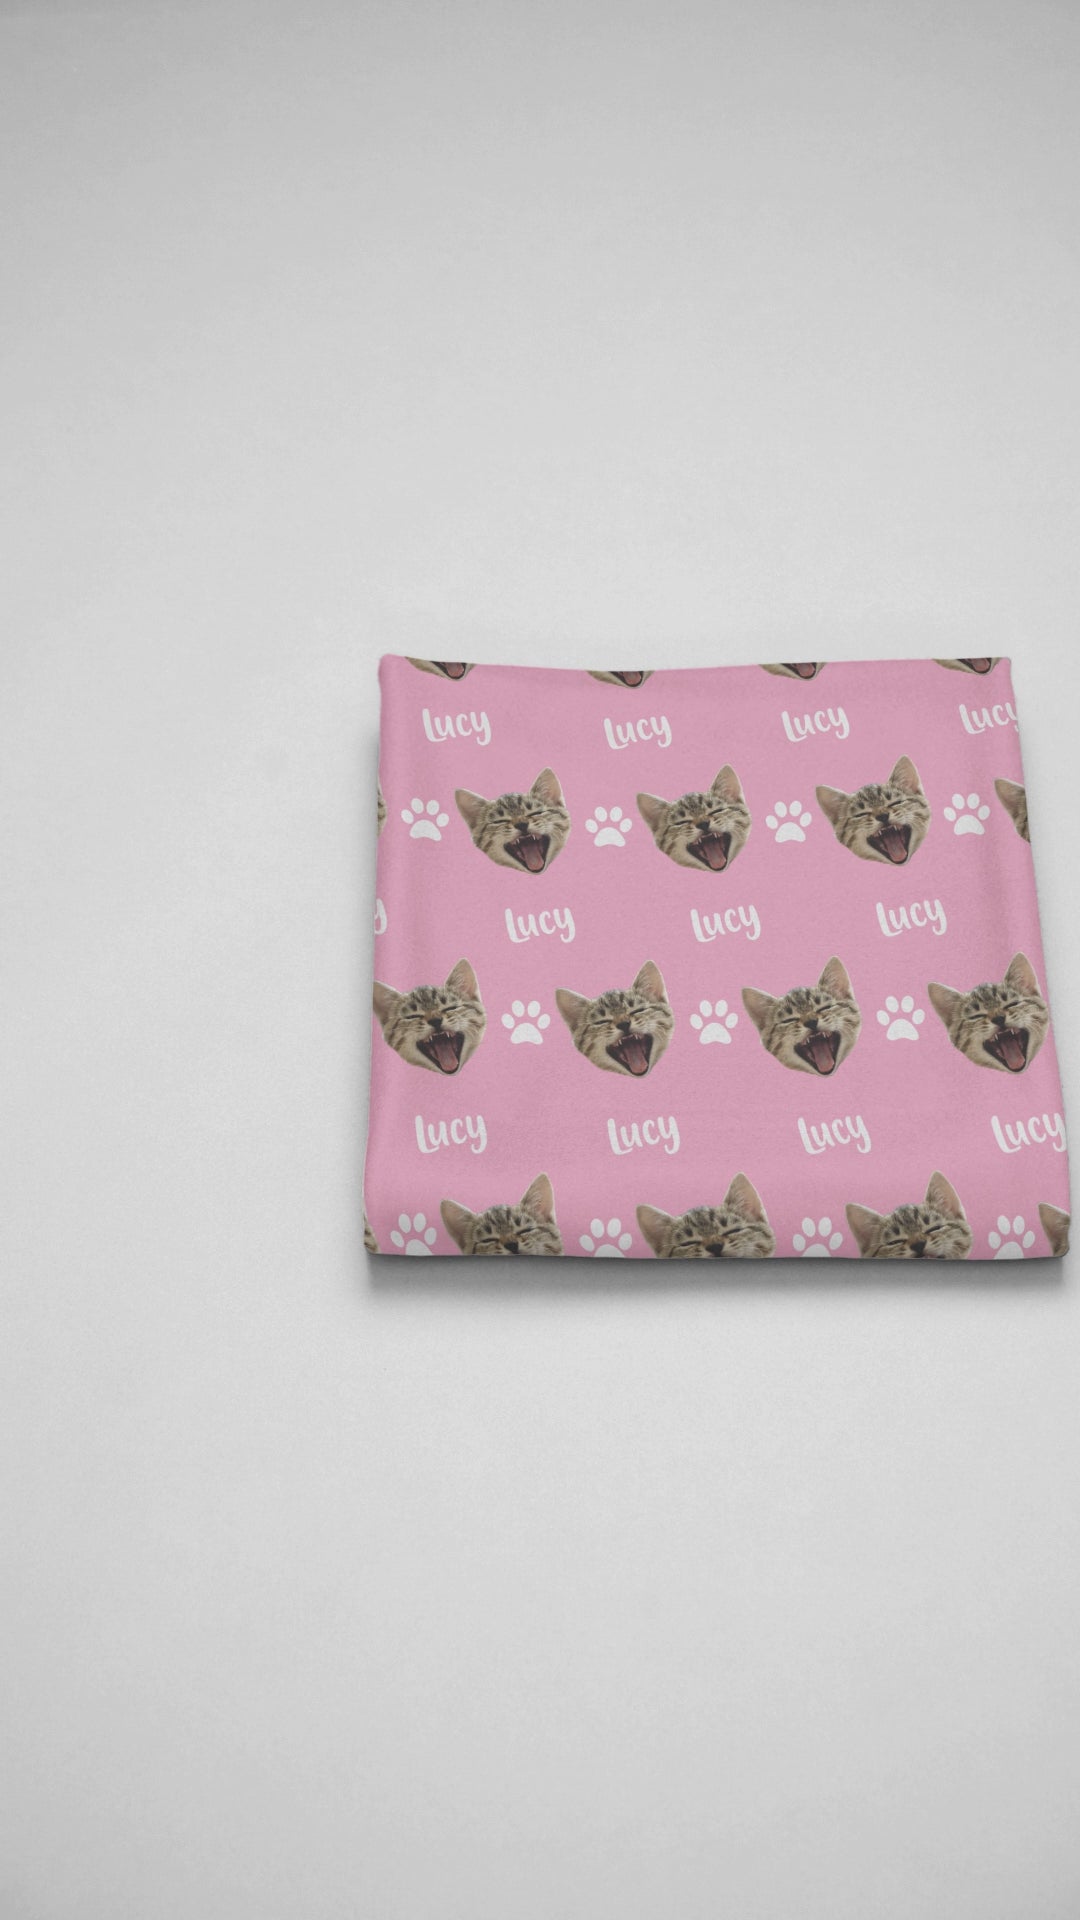 Video showcasing a folded blanket with a customized cat head design and personalized name displayed.